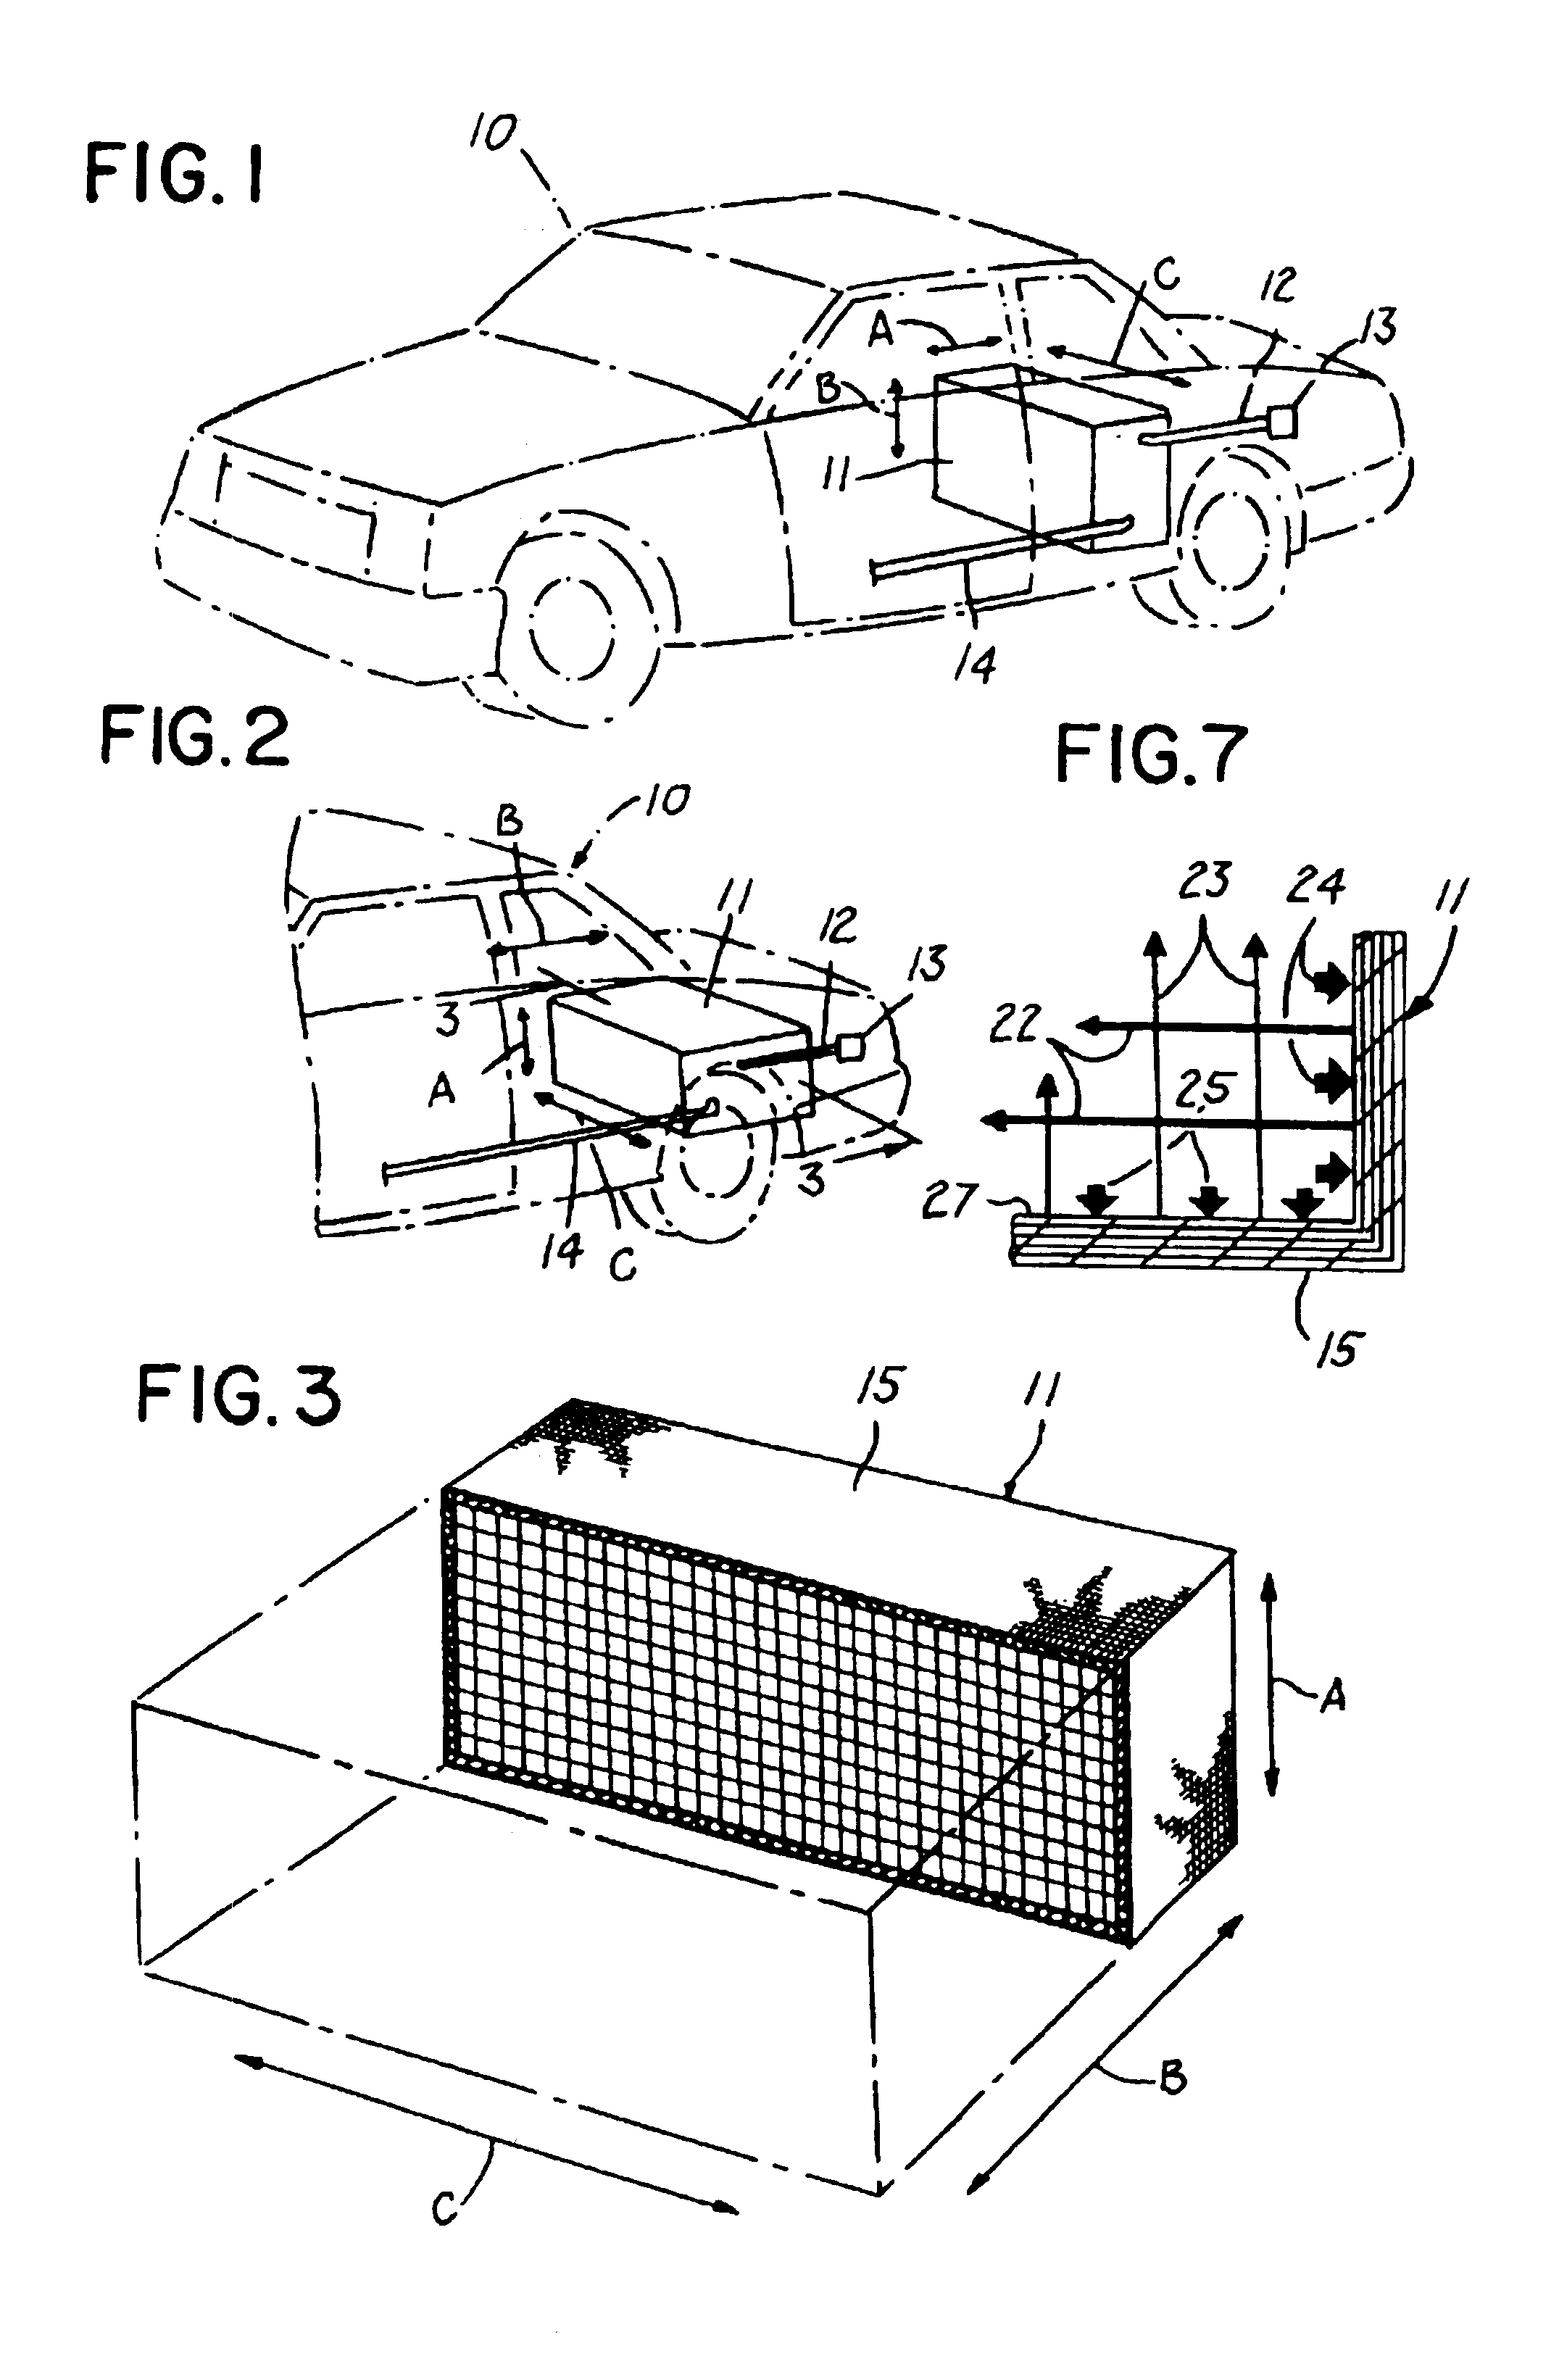 Reinforced composite structure